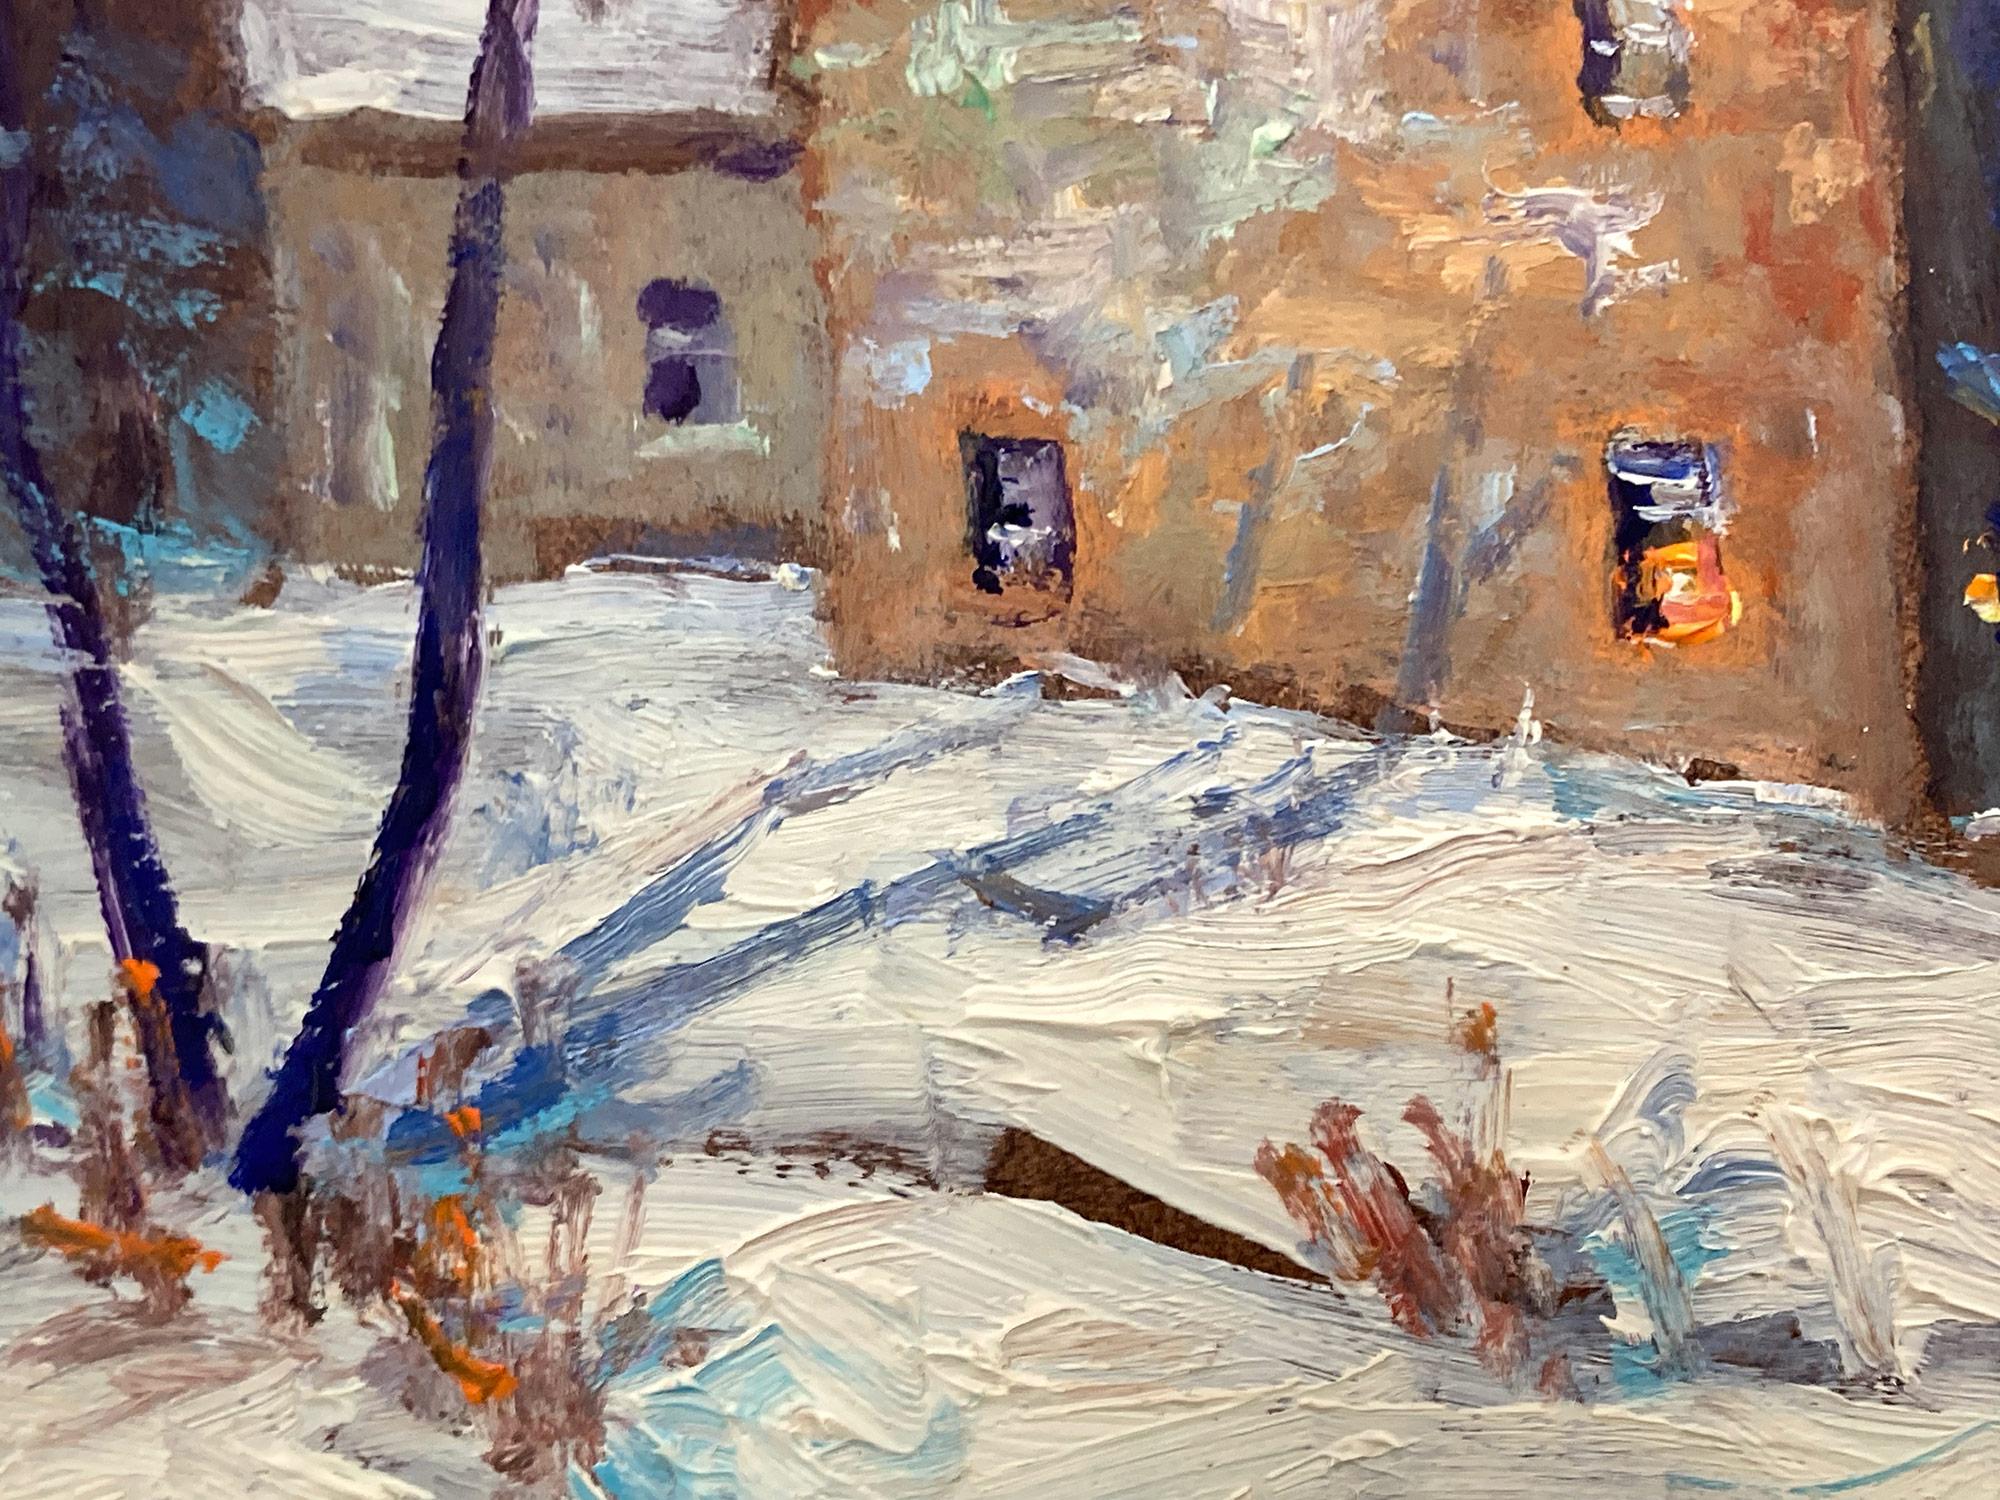 Impressionist winter pastoral scene of a quaint snow covered home by Bowman Tower, PA. Willett has portrayed this charming scene in a most intimate, yet energetic way, and has packed much feeling into this miniature work. It is almost as if we are